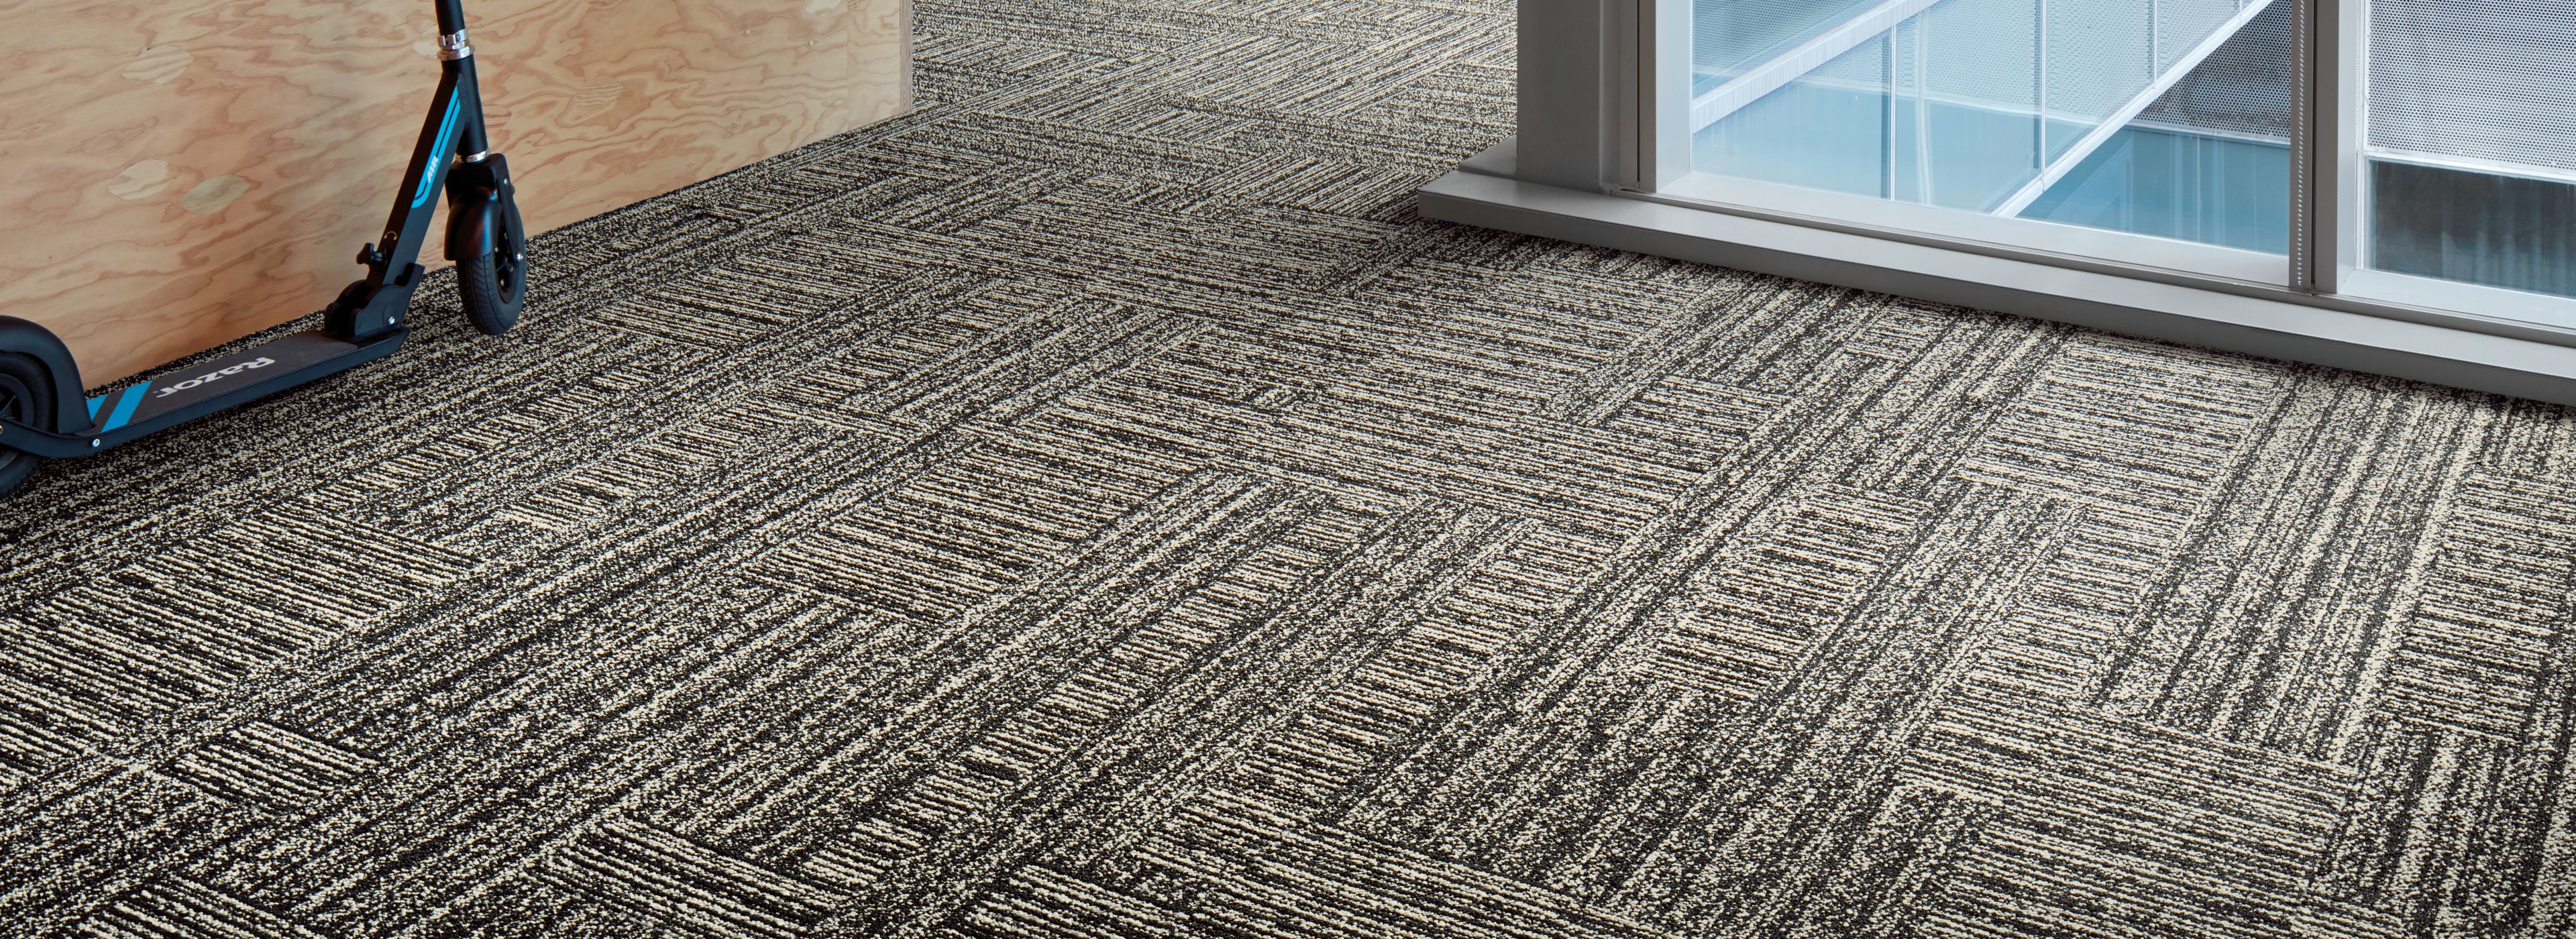 image Interface Decibel and Hard Drive plank carpet tile in small area with glass windows numéro 1